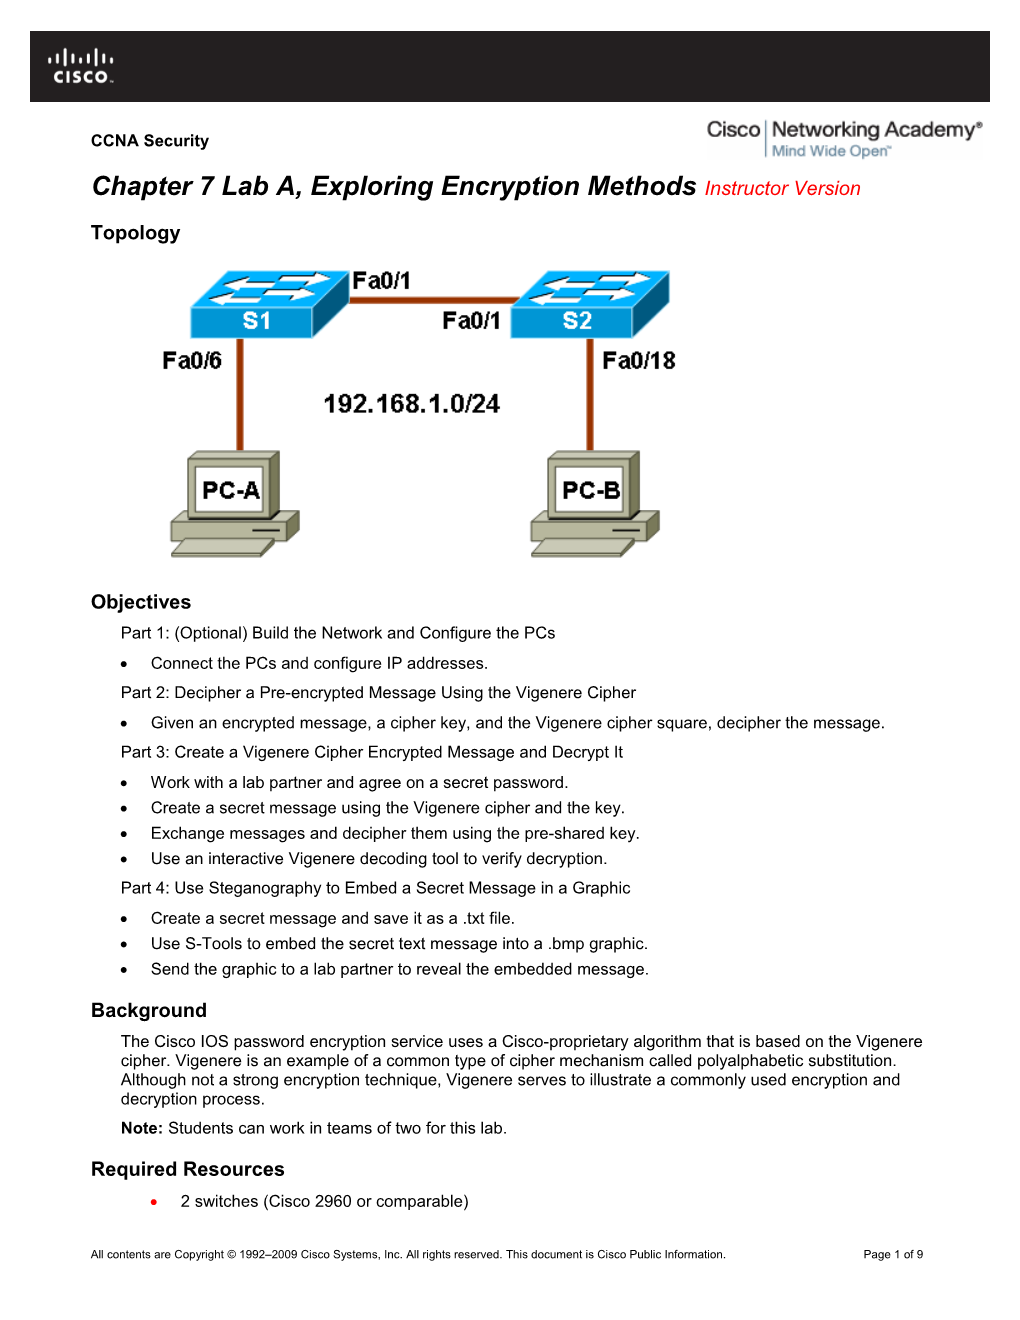 Chapter 7 Lab A, Exploring Encryption Methods